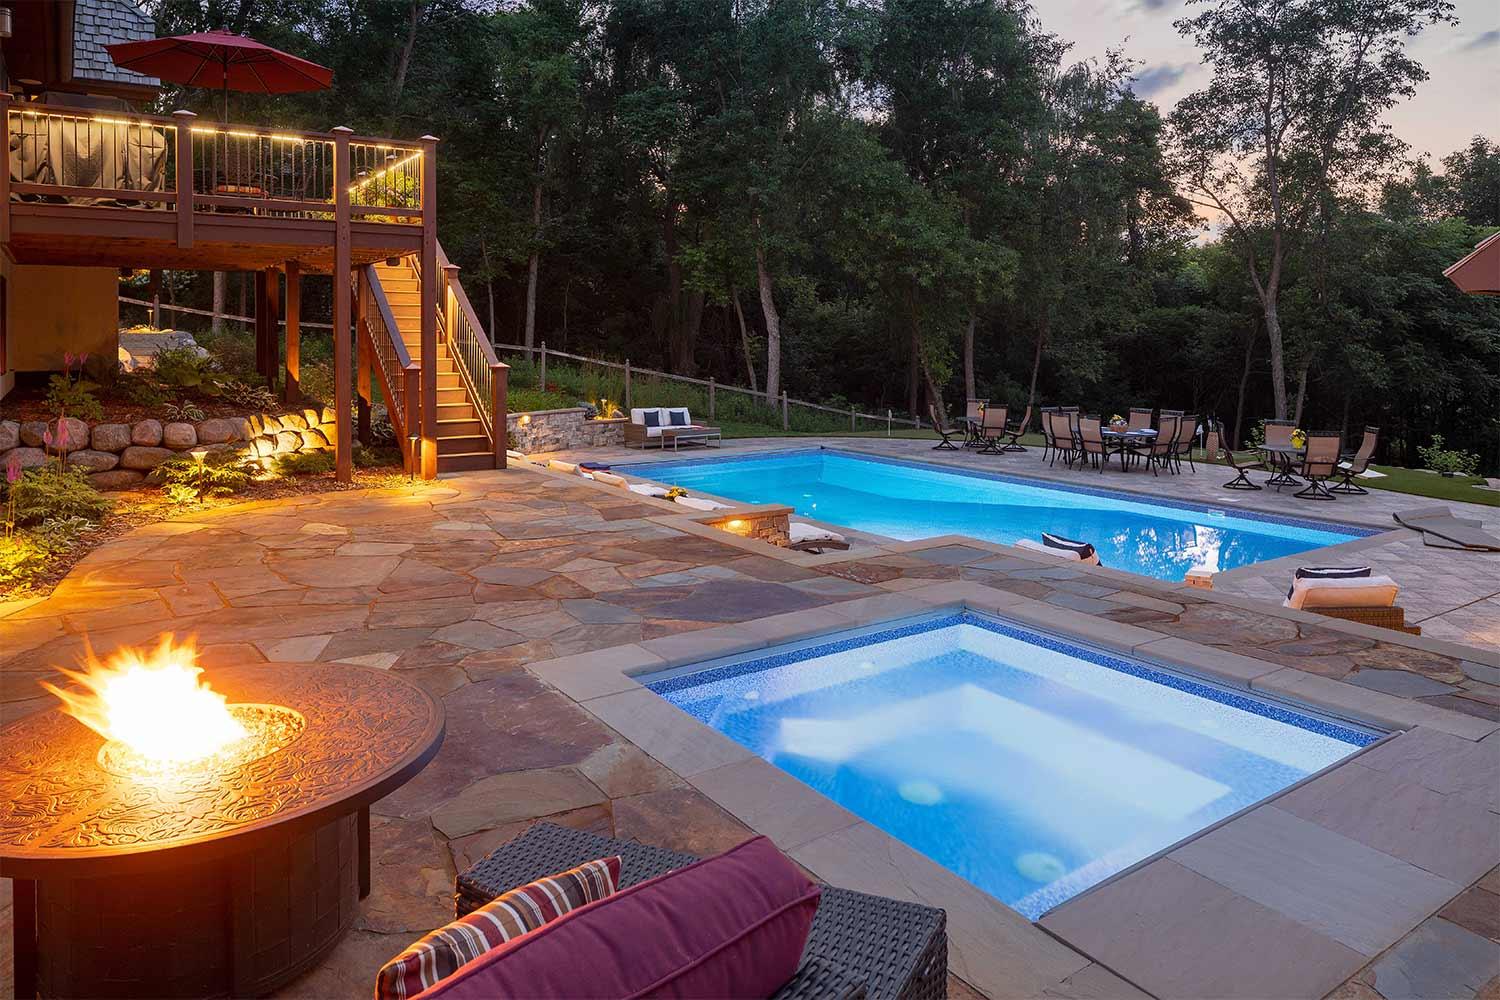 Fire table, hot tub, and swimming pool at dusk.